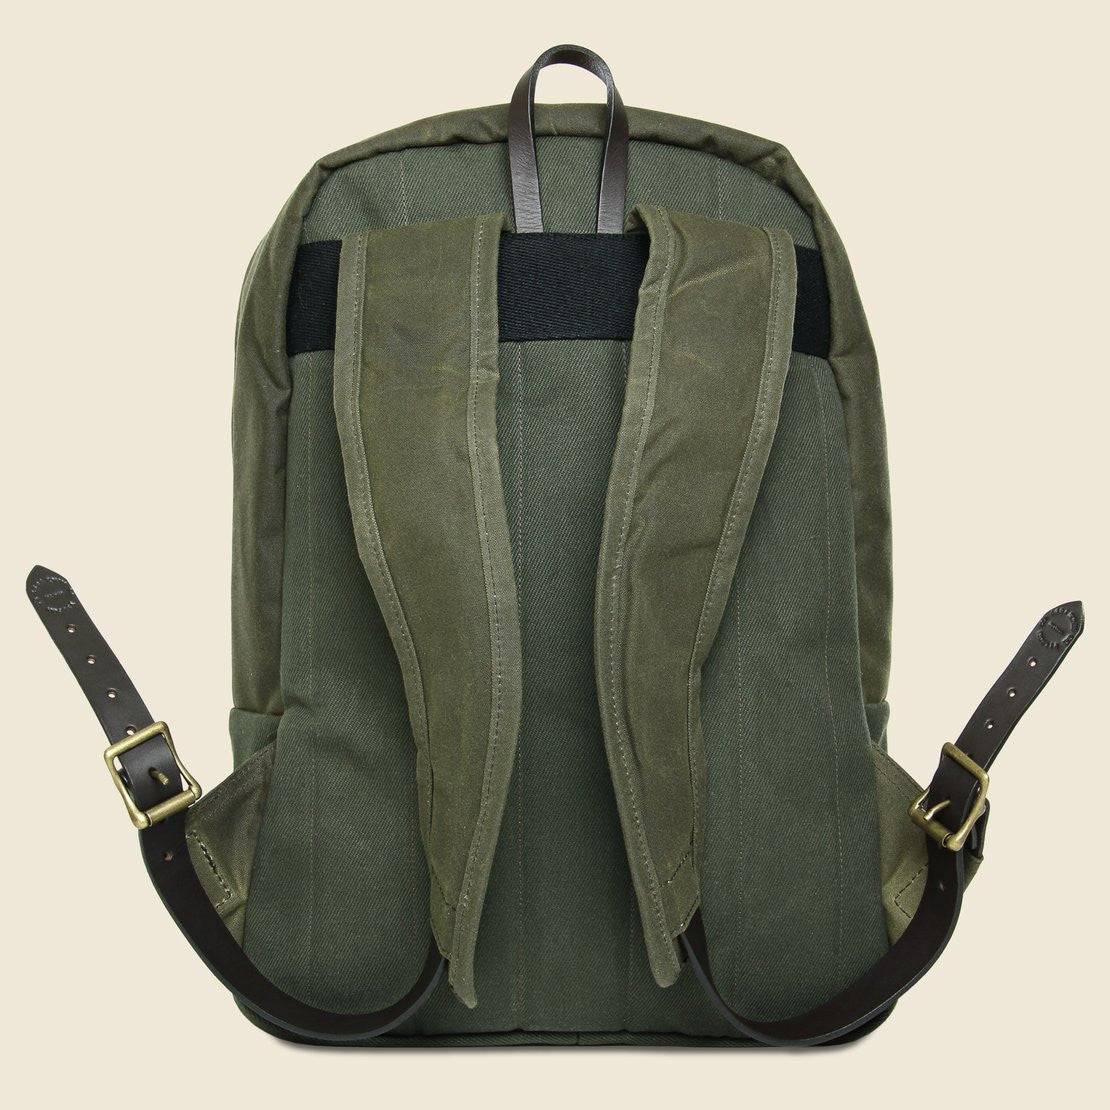 Tin Cloth Journeyman Backpack - Otter Green - Filson - STAG Provisions - Accessories - Bags / Luggage